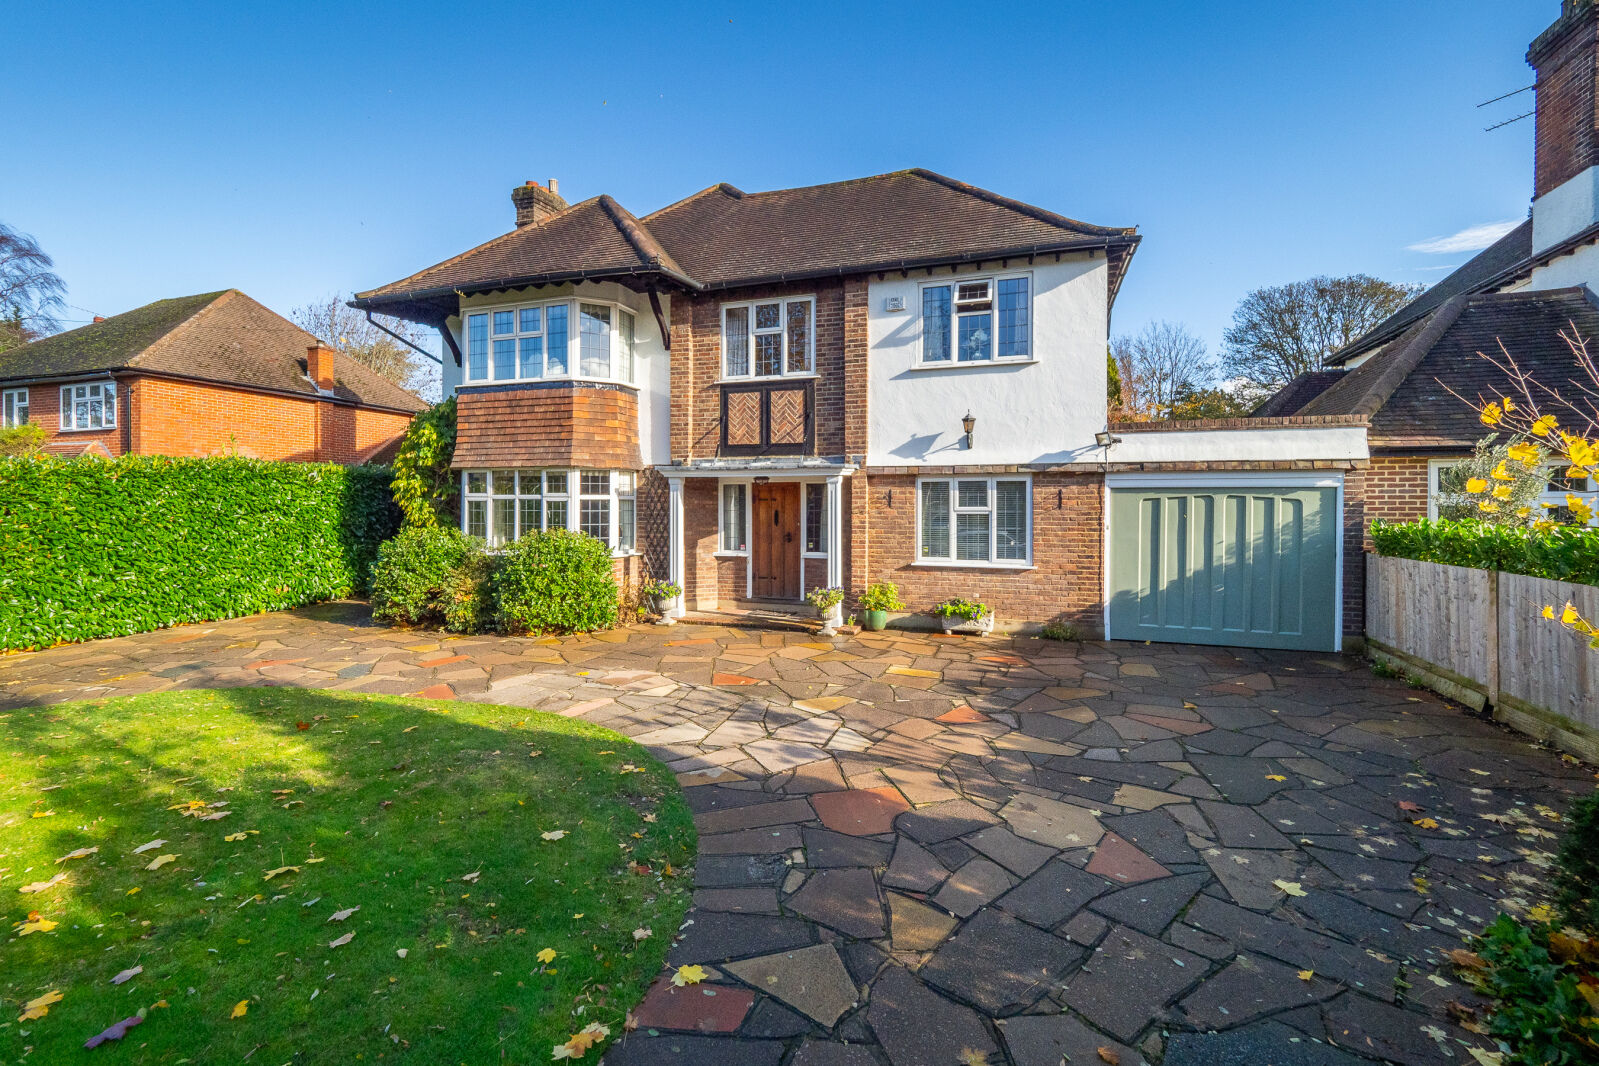 5 bedroom detached house for sale Sandy Lane, Cheam, SM2, main image